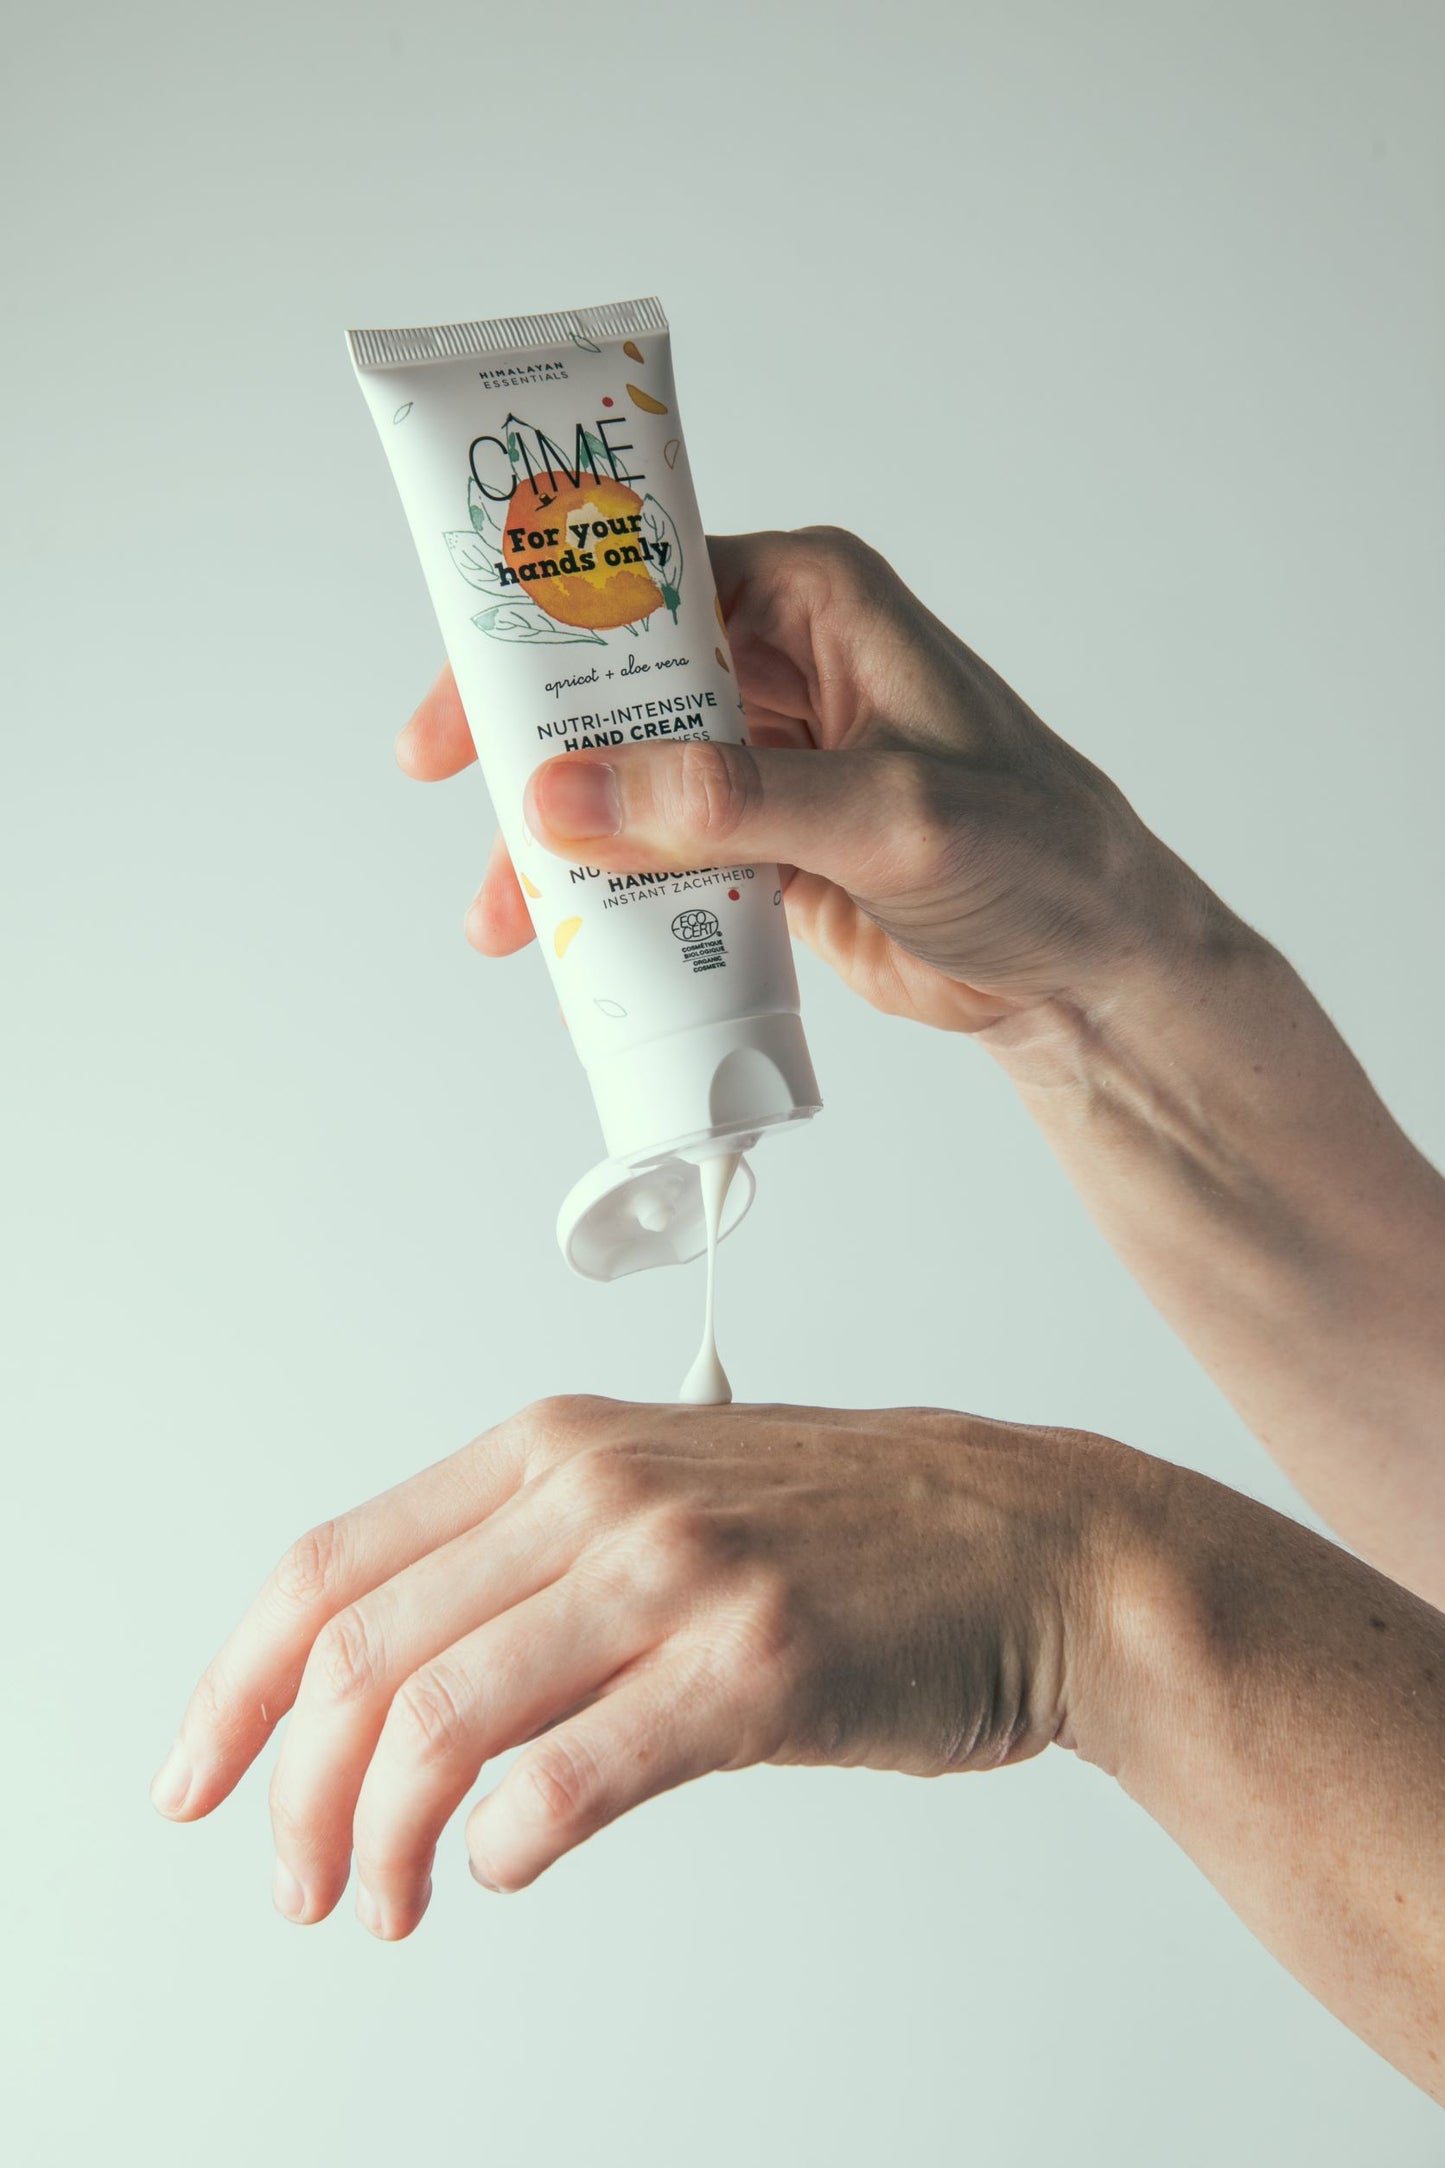 For your hands only | Nutri-intensieve handcrème